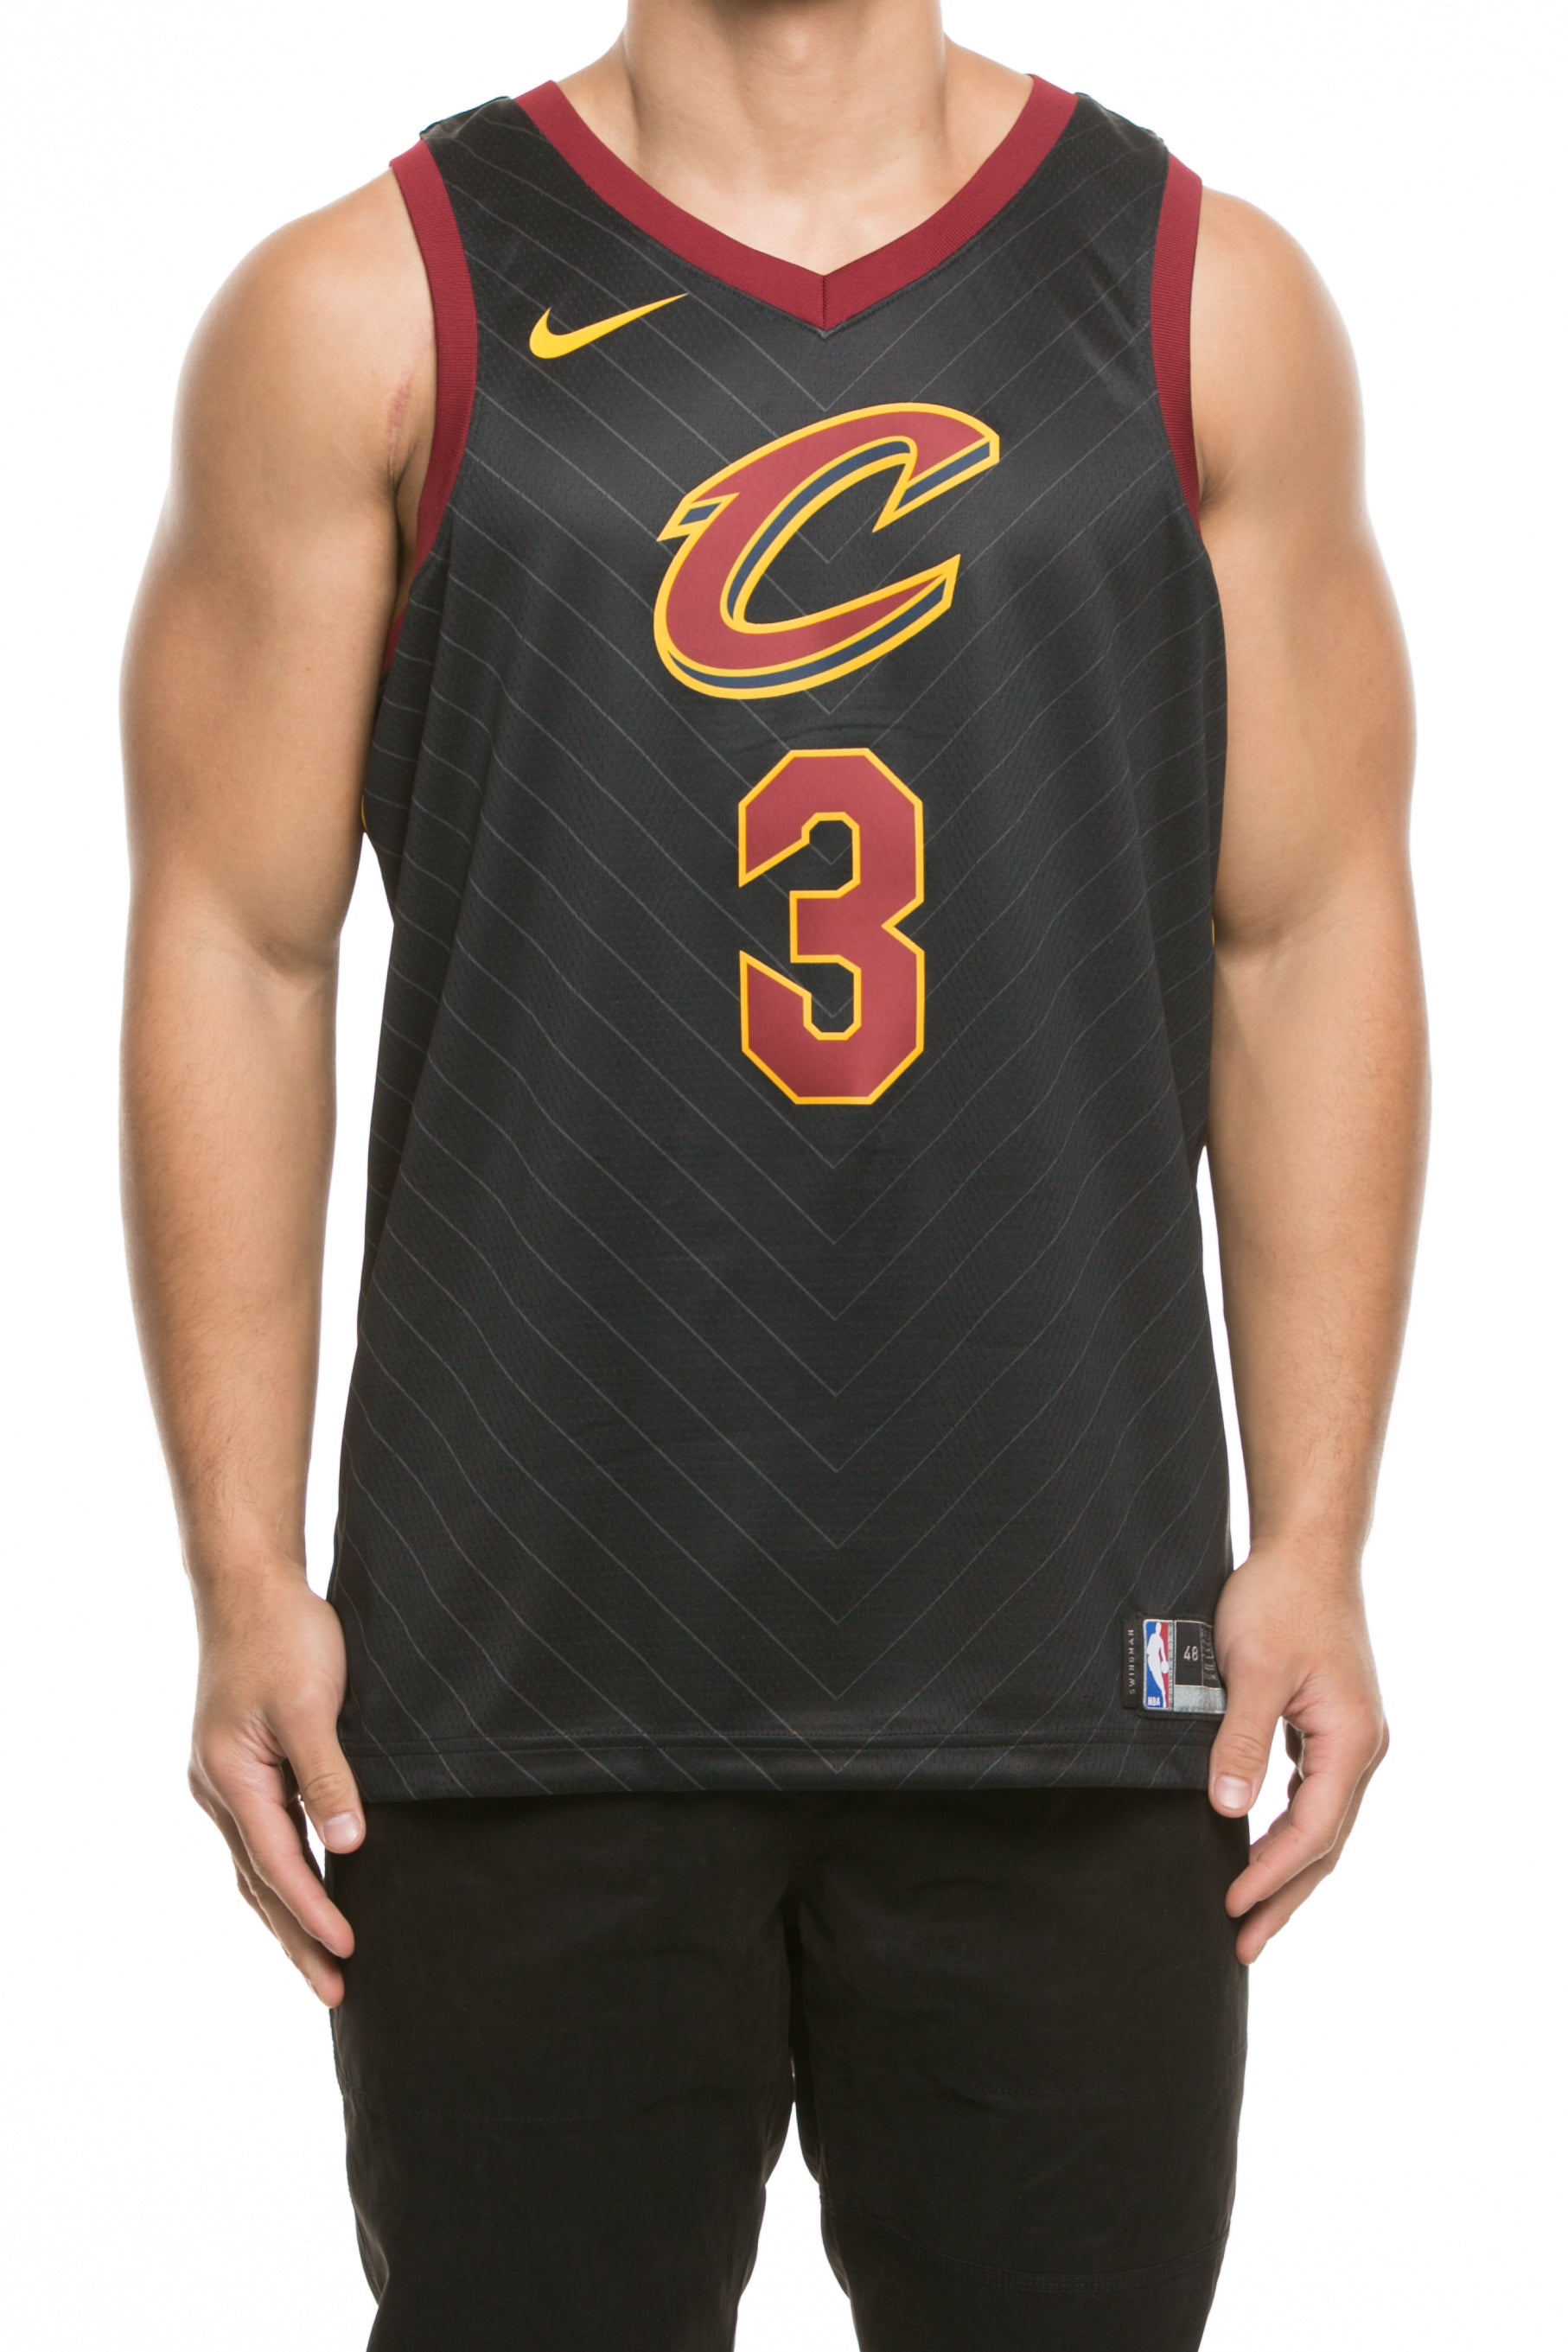 black and red nba jersey